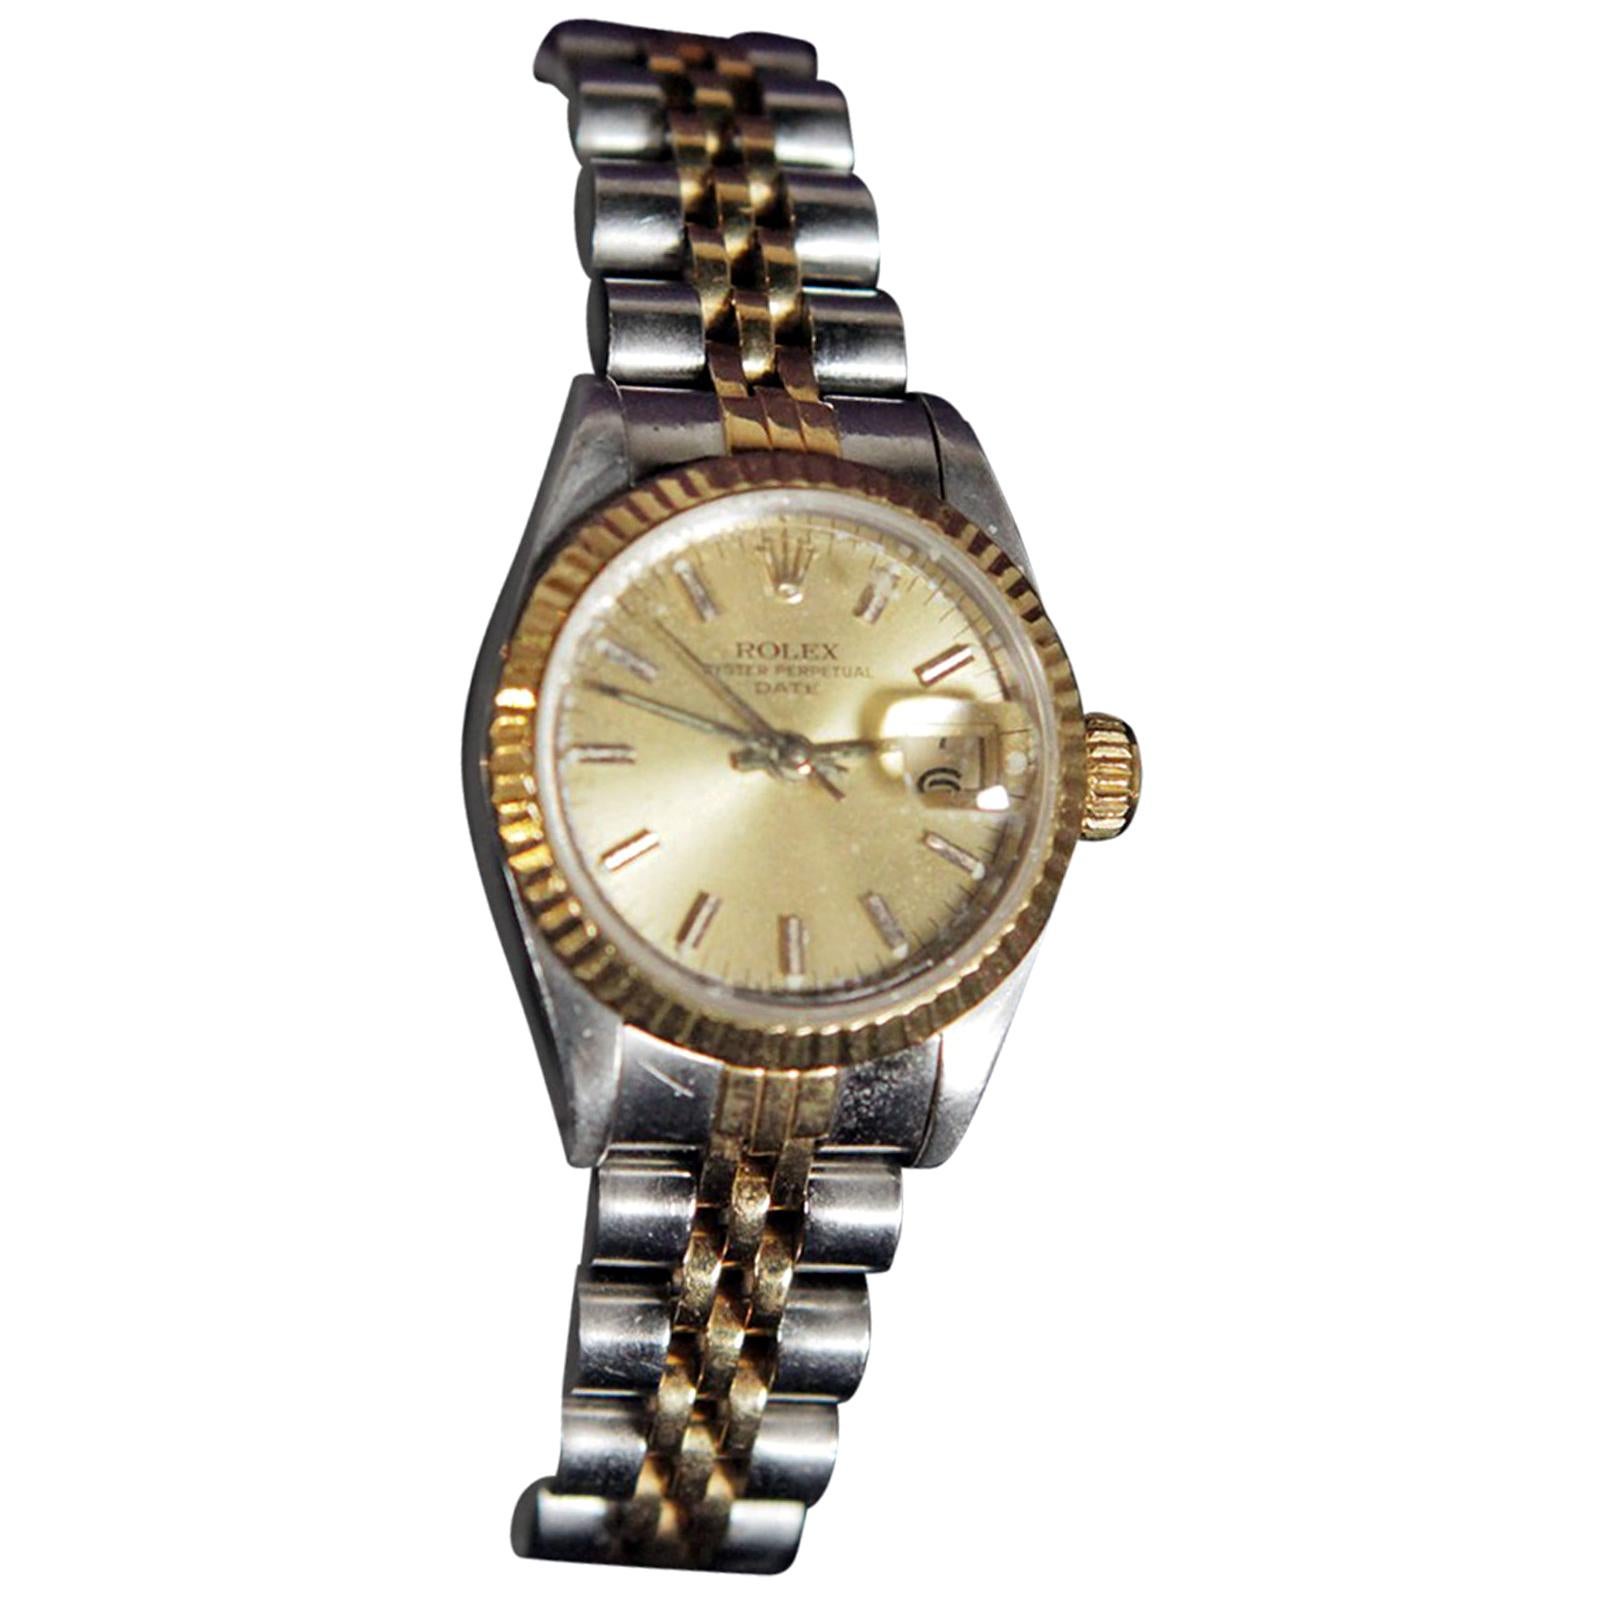 Vintage Ladies Oyster Perpetual 14-Karat Gold and Stainless Rolex Watch